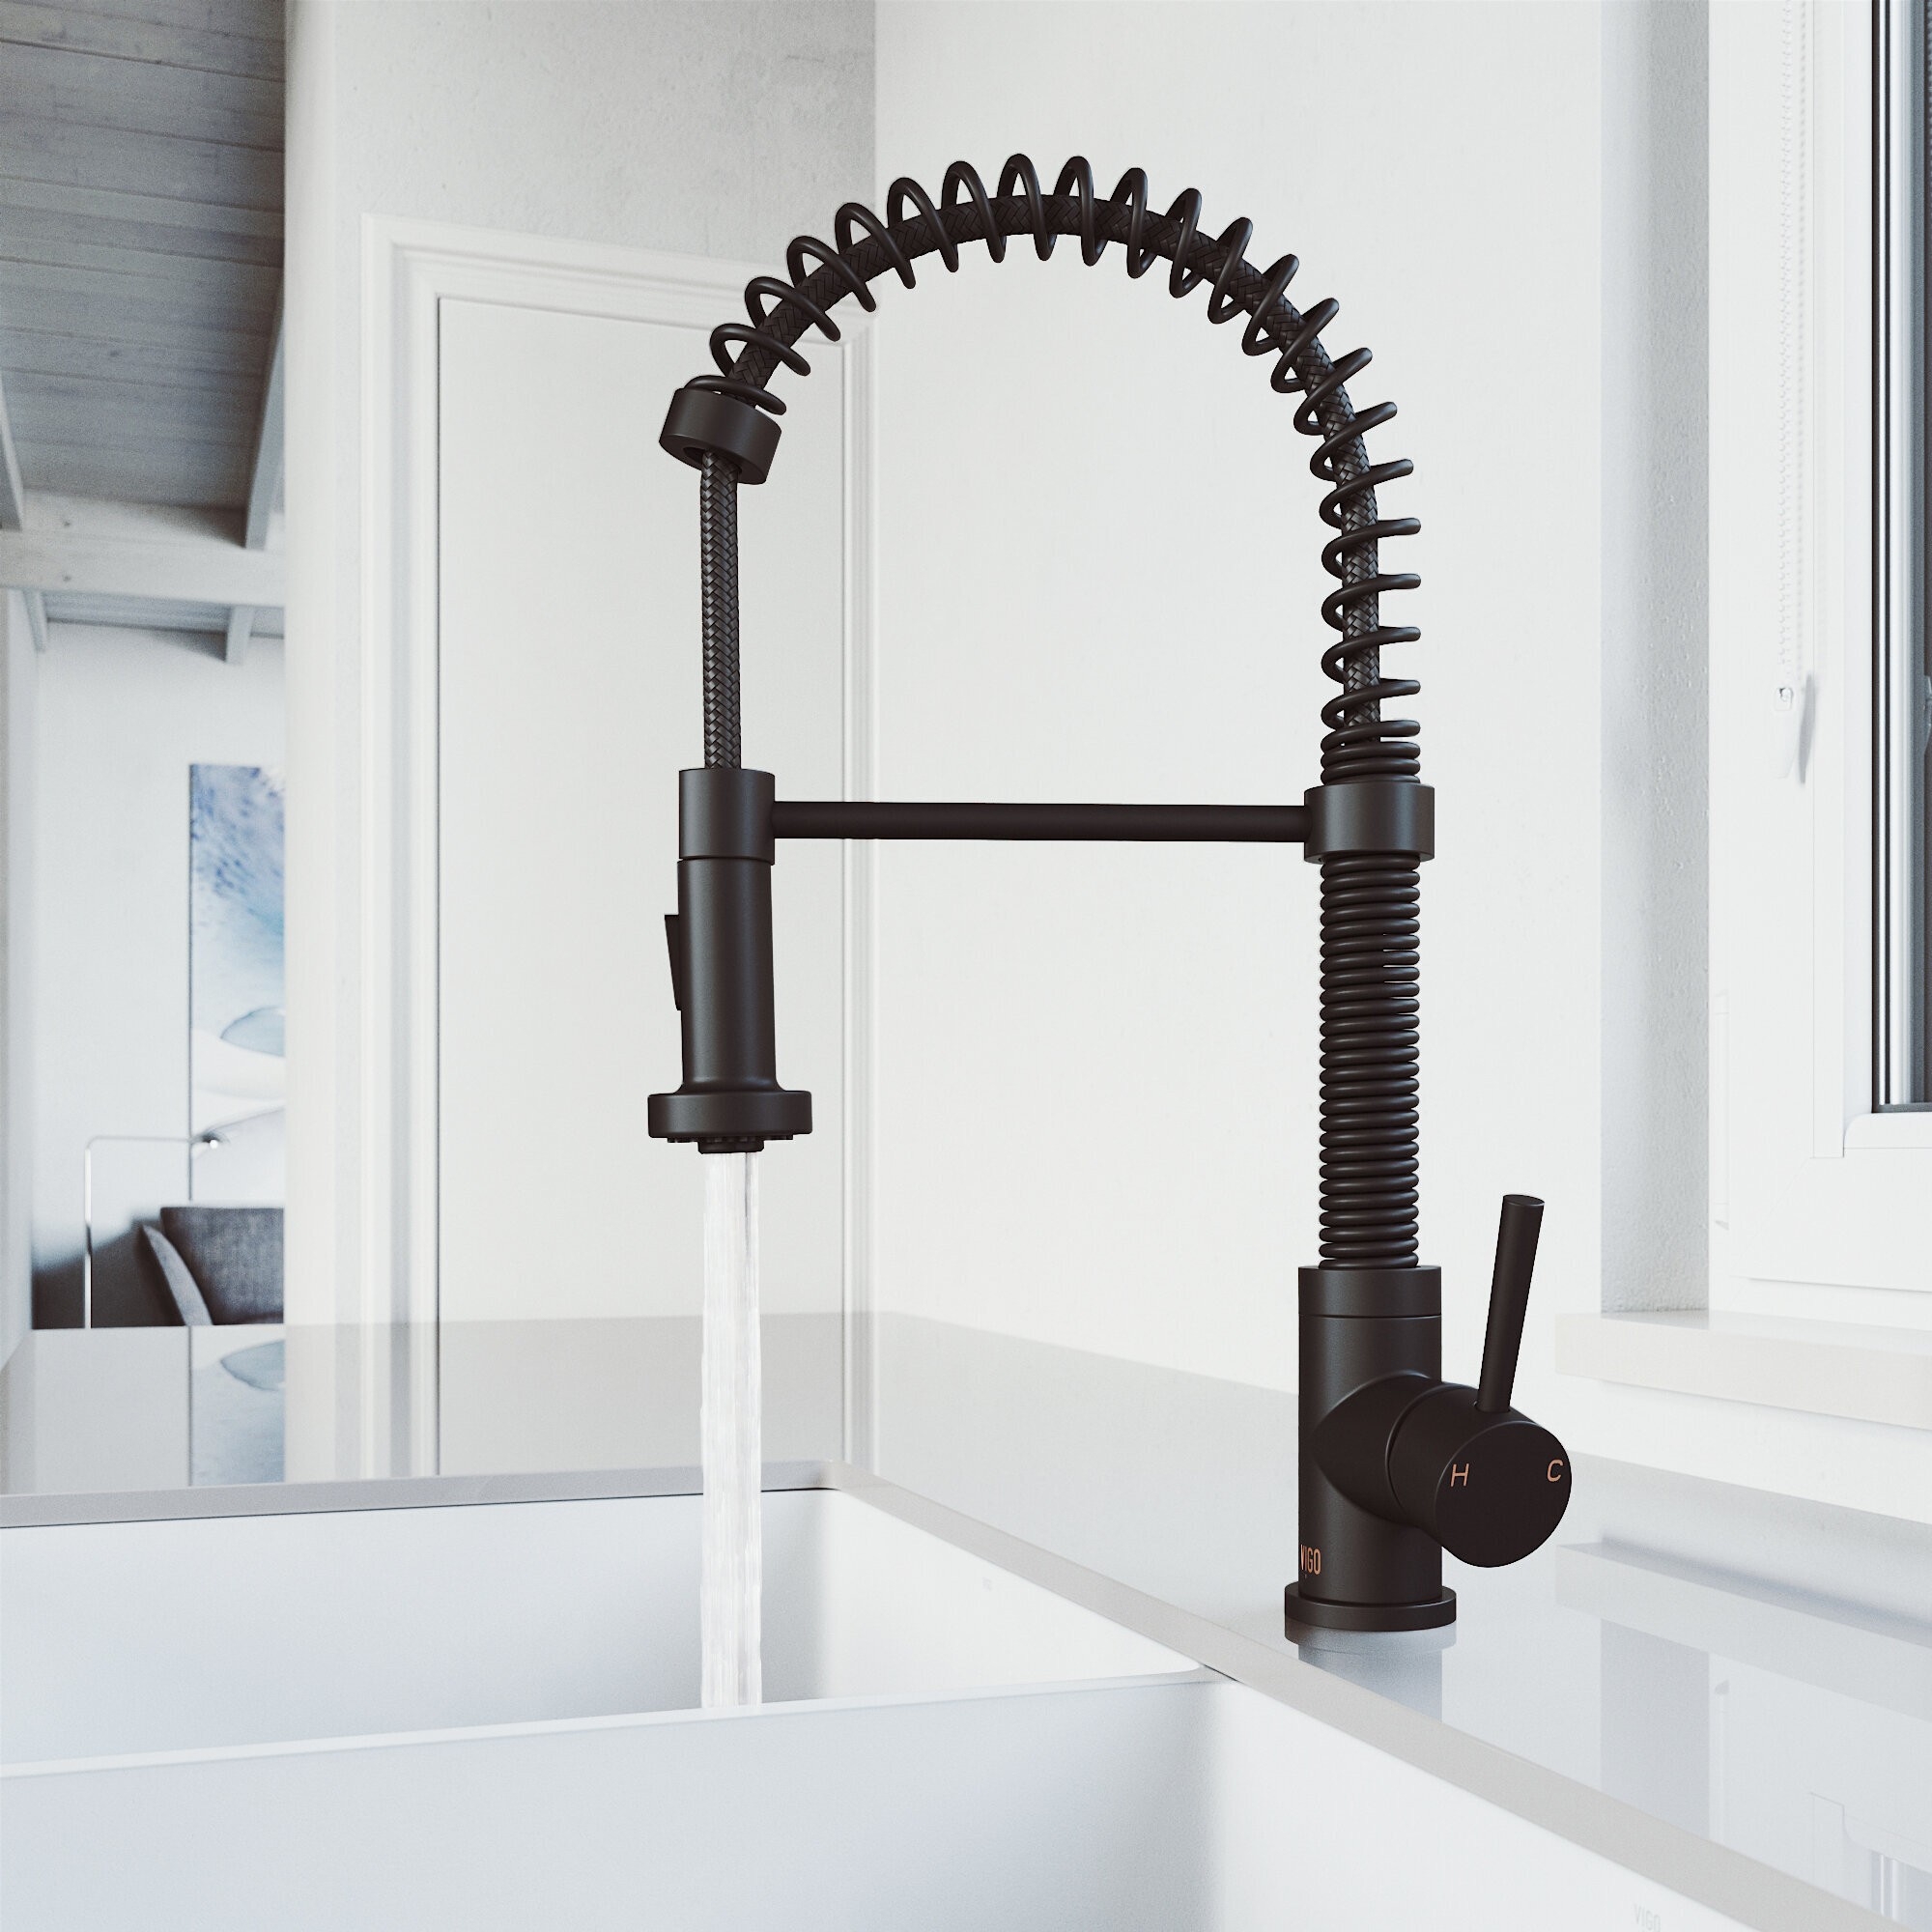 10 Best Kitchen Faucets With Pull Down Sprayer - Foter